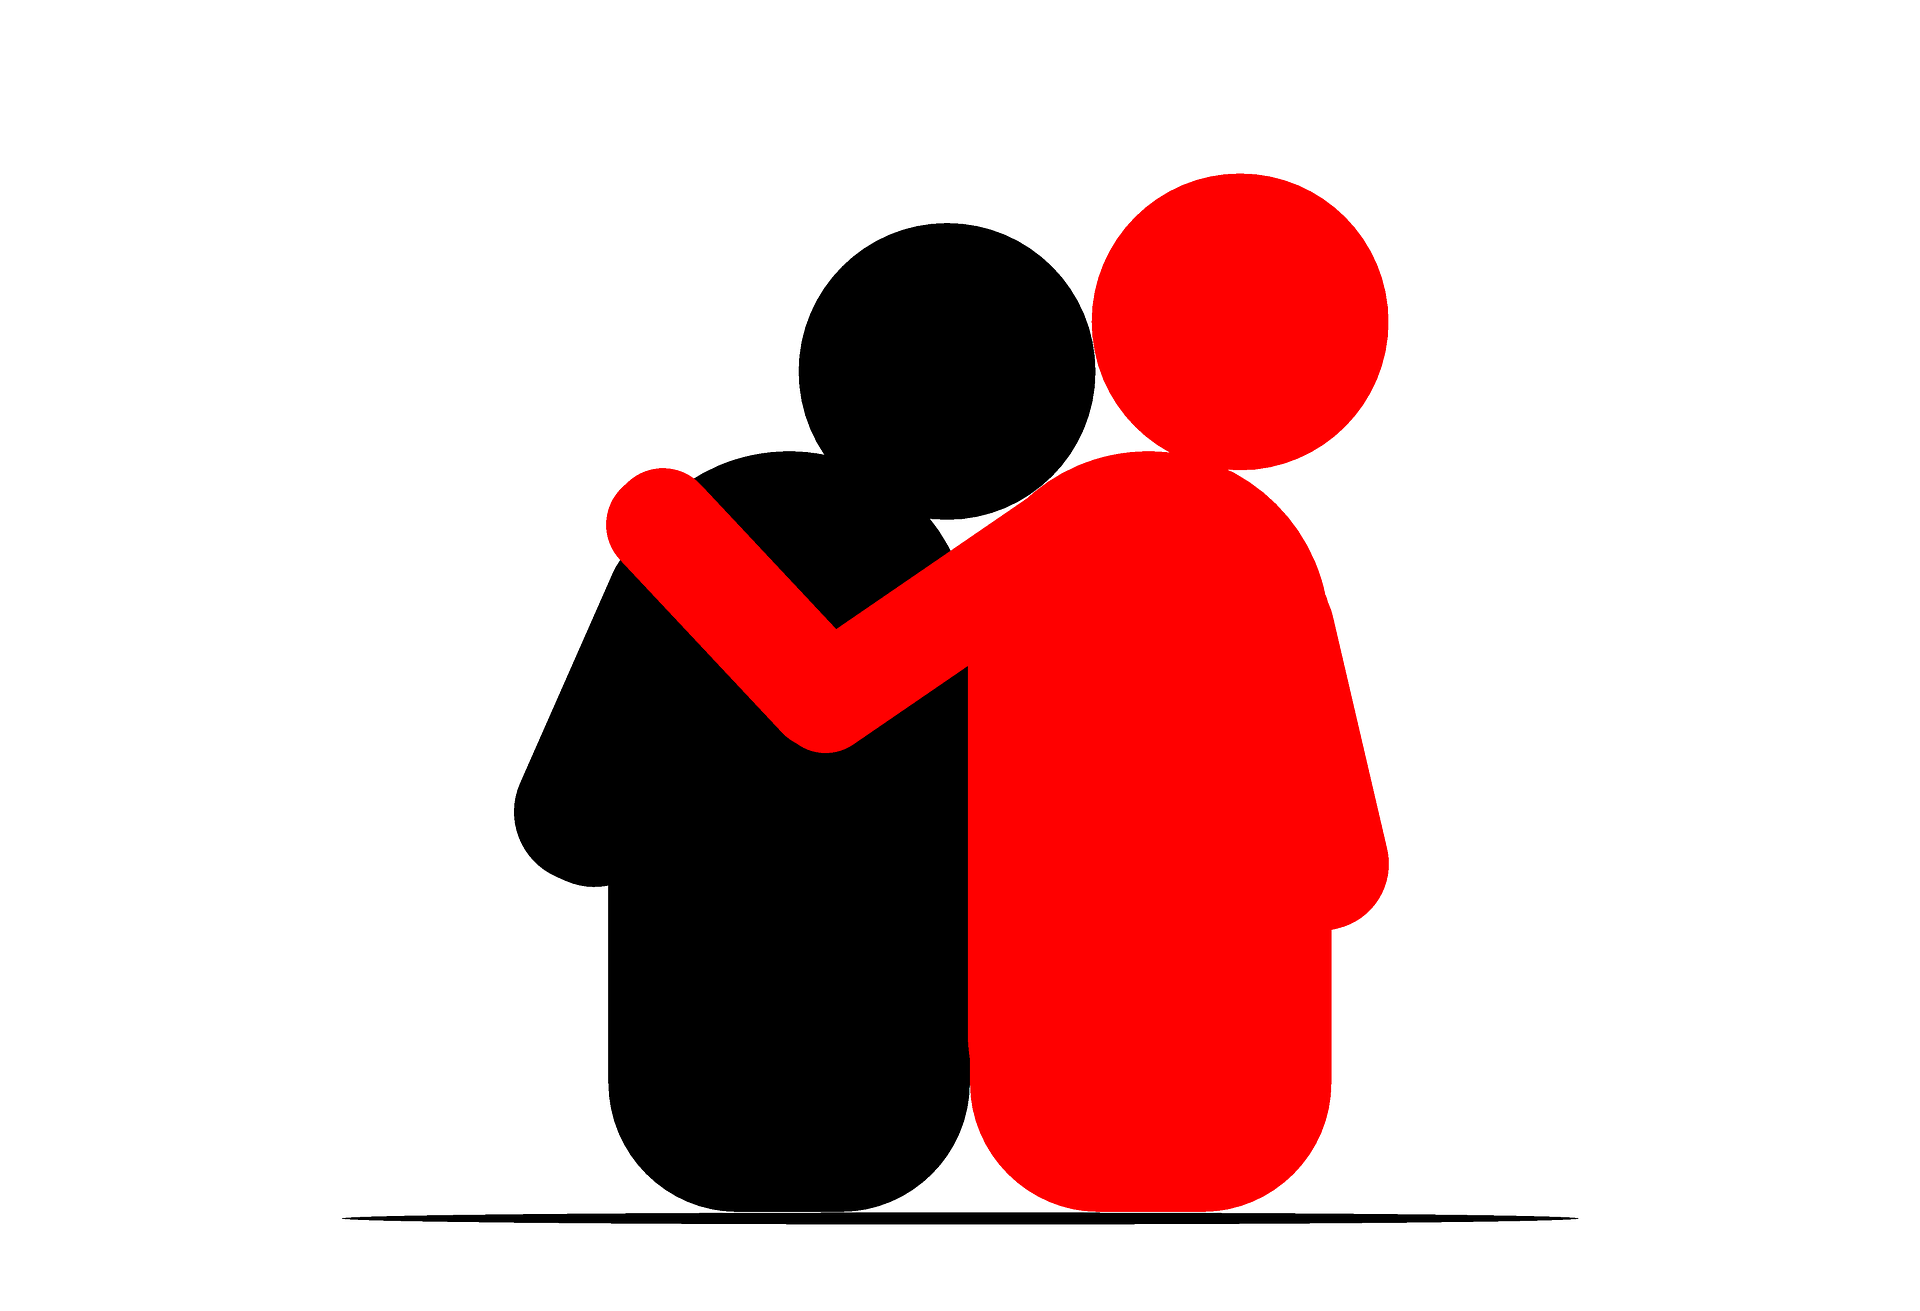 A red human silhouette wrapping an arm around a black silhouetted figure